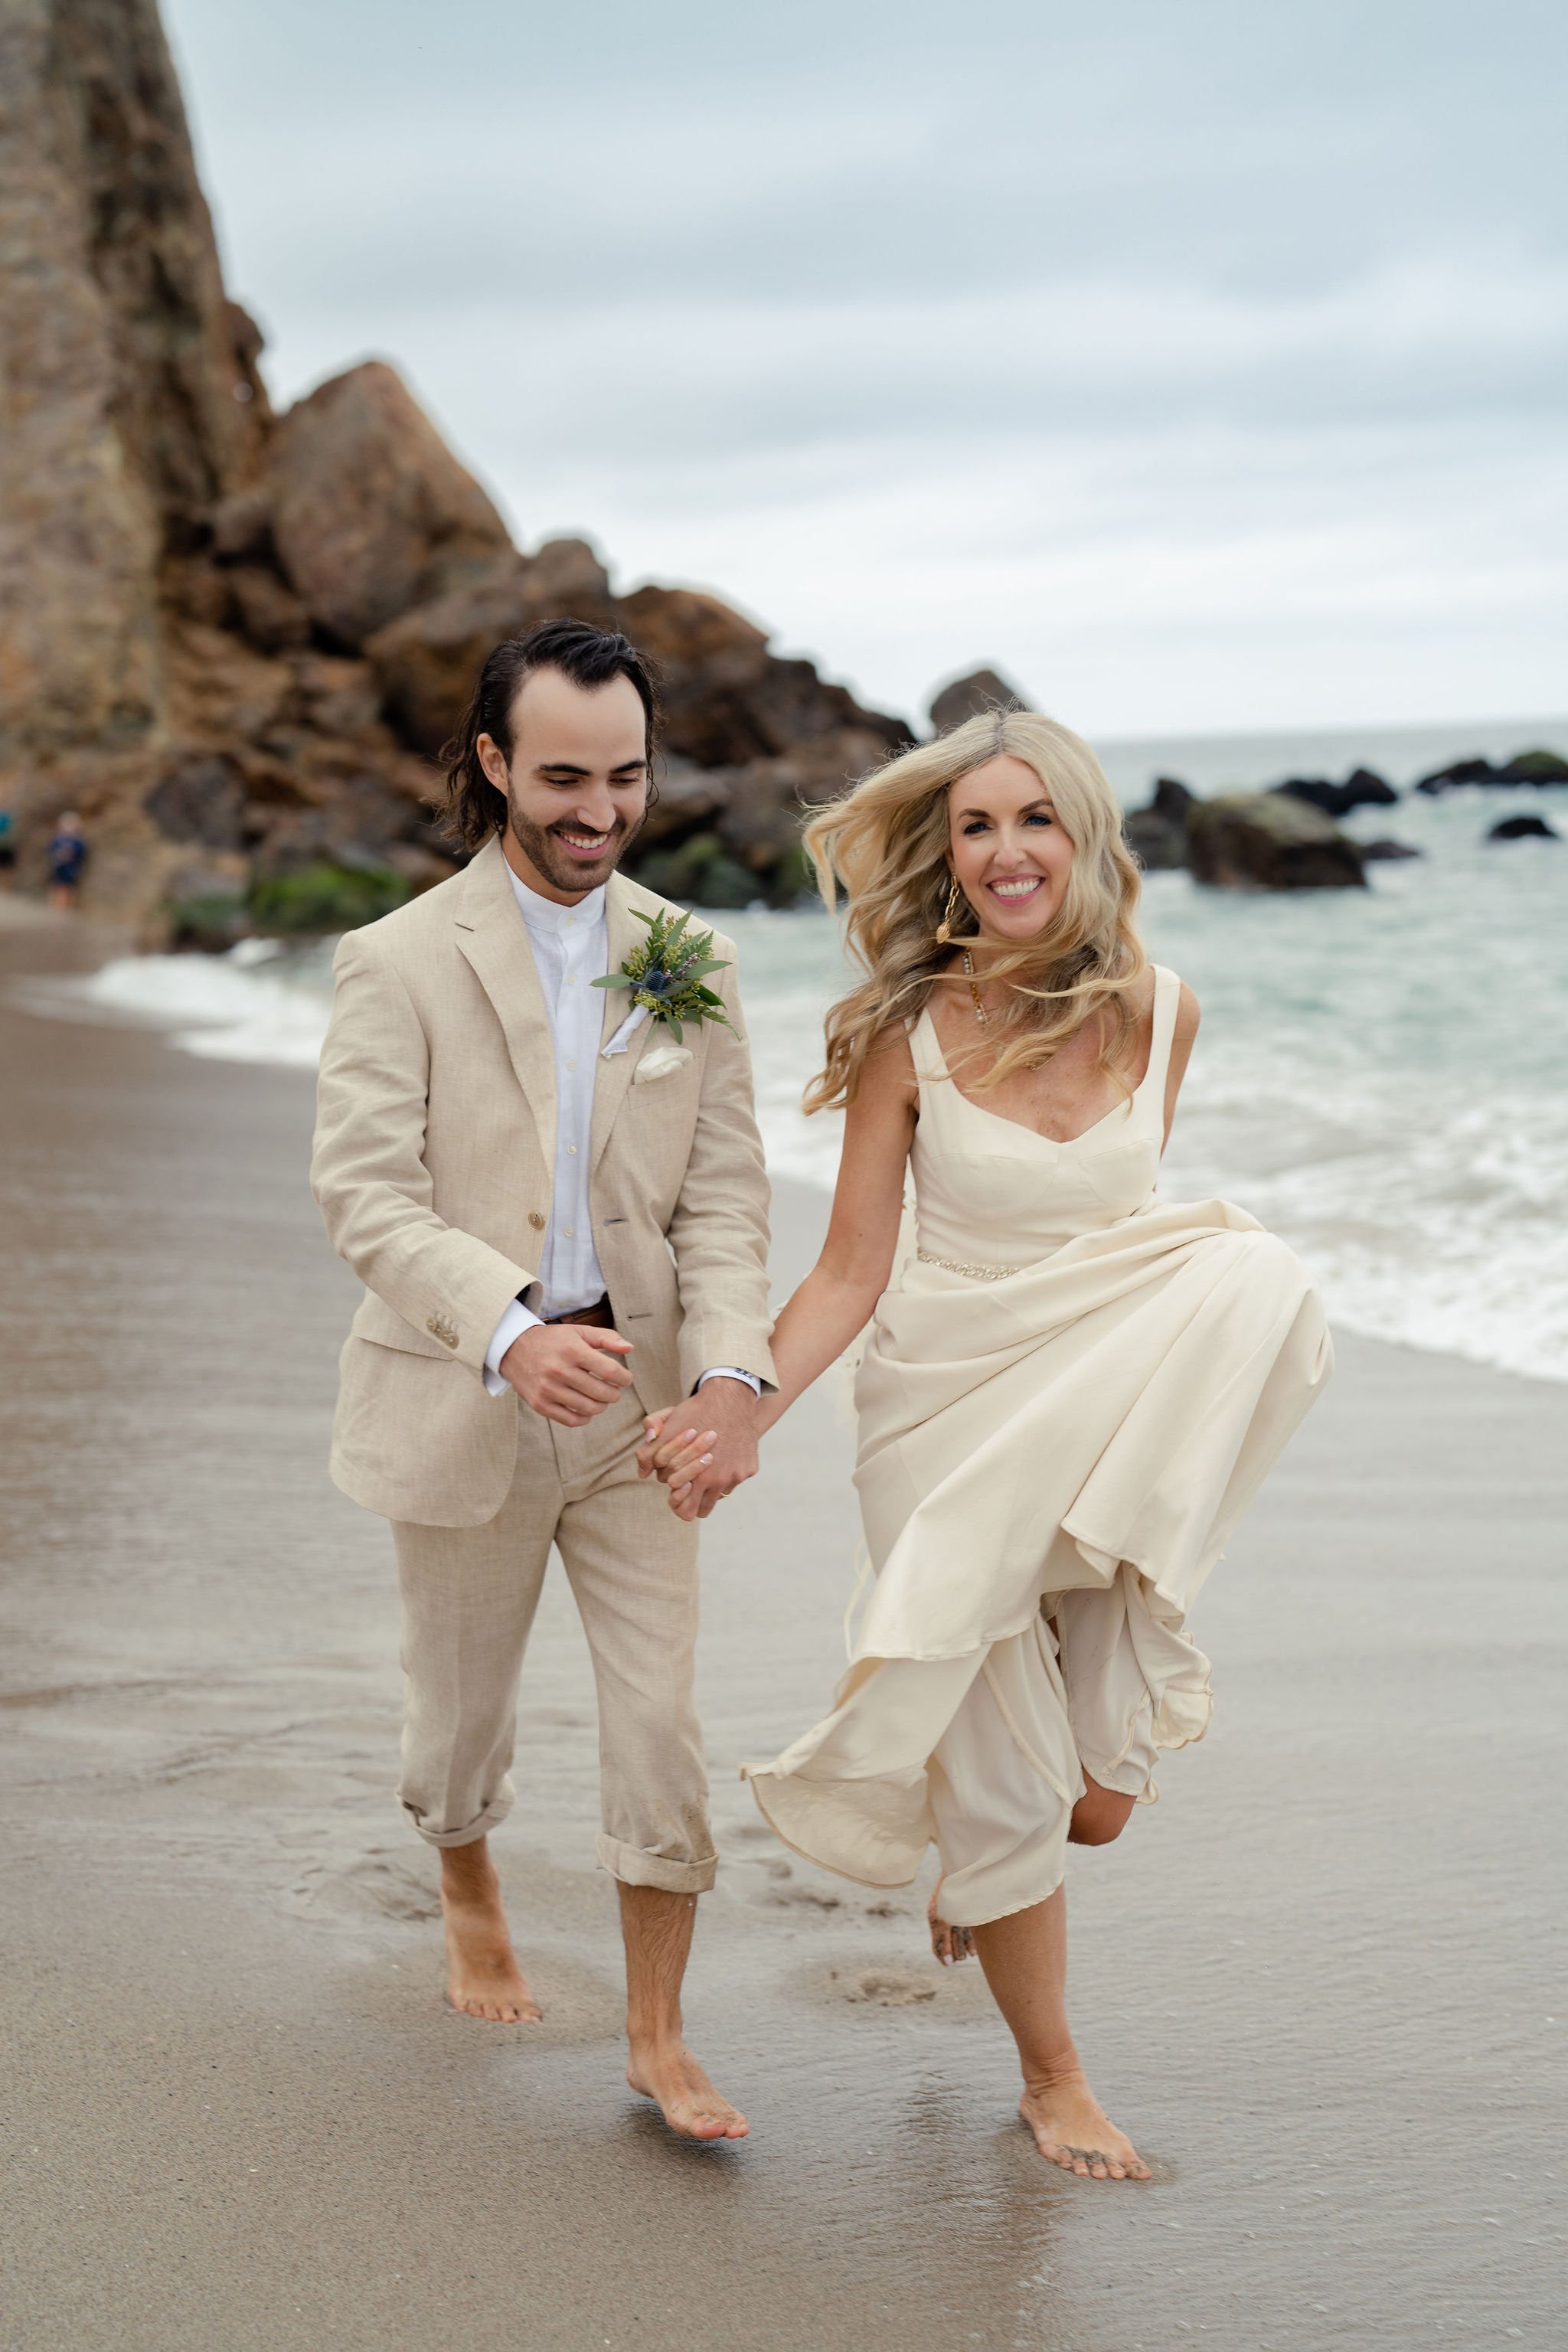 founder, podcast host, and manifestation coach plans wedding ceremony along the cliffs of point dume beach in malibu